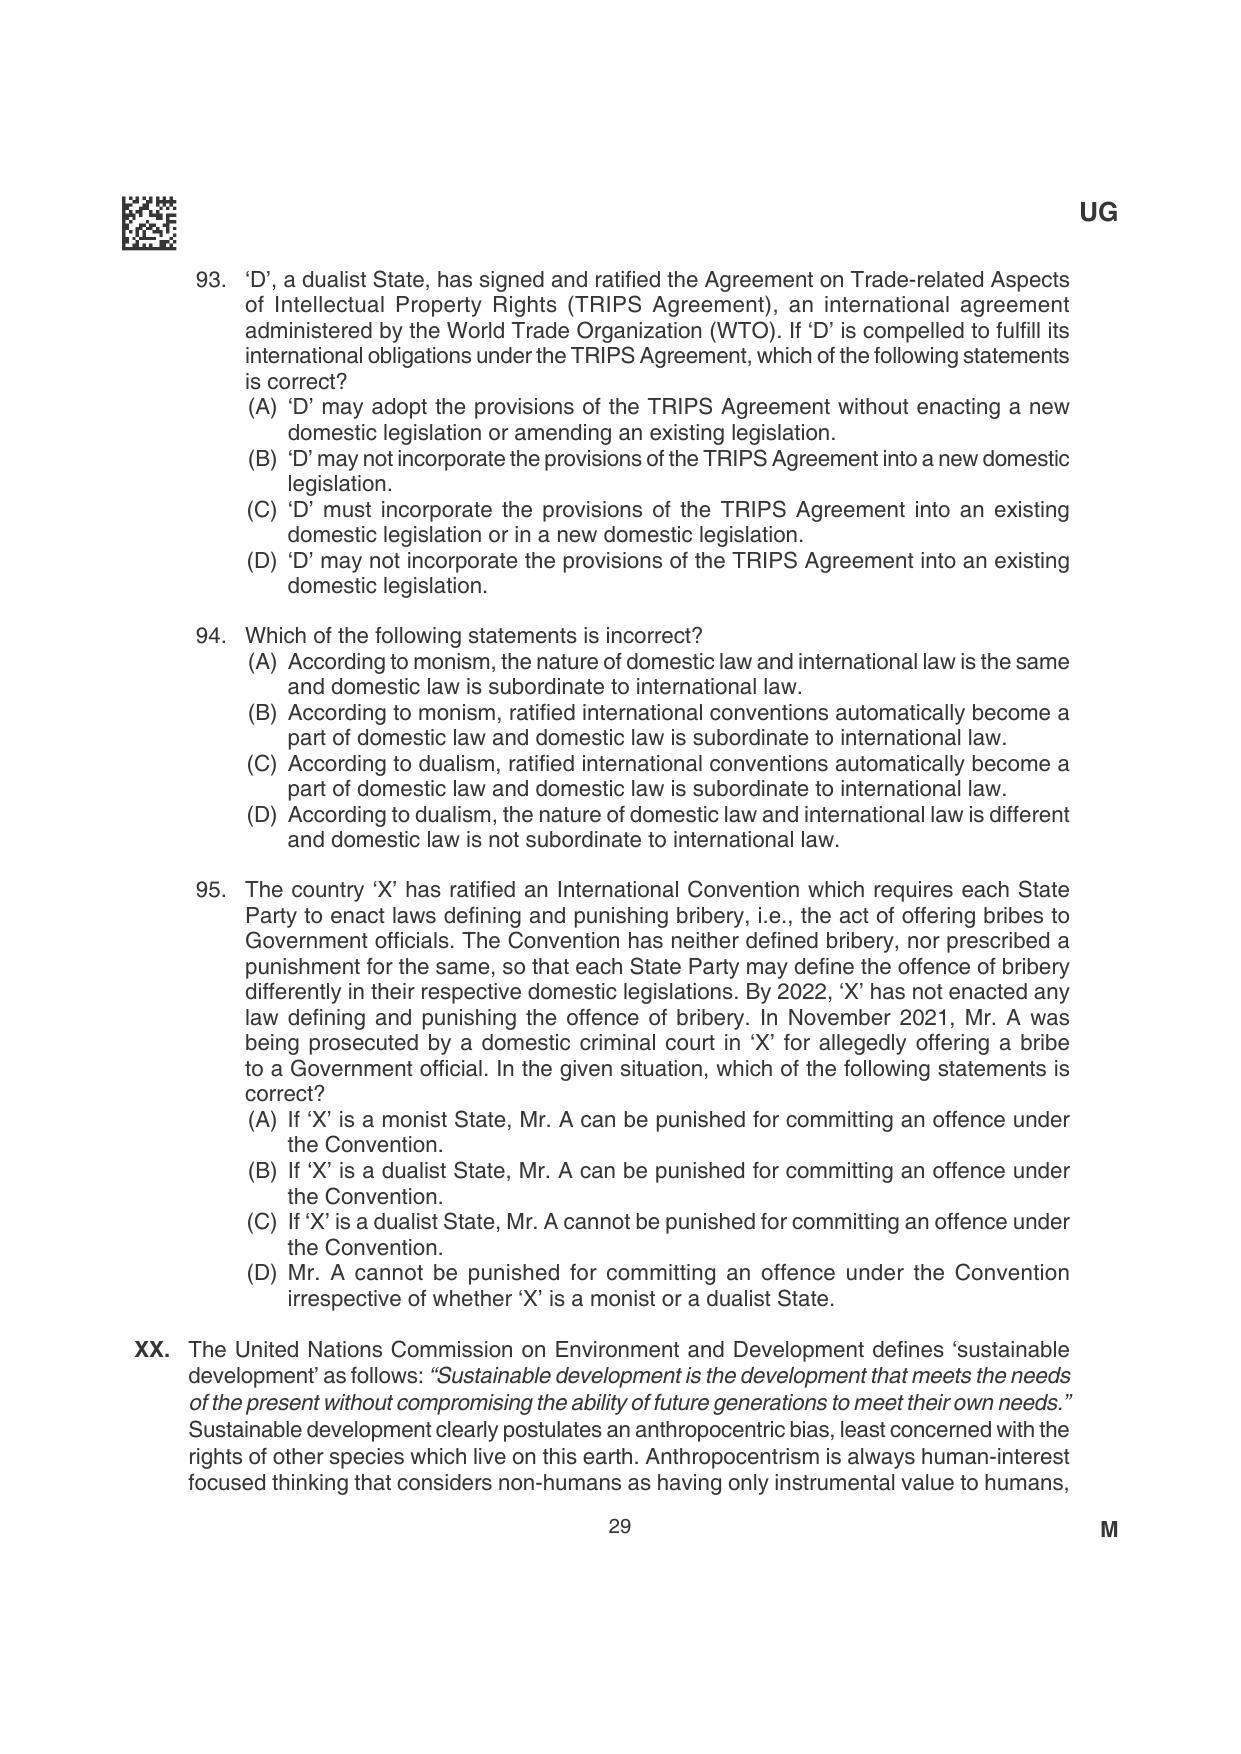 CLAT 2022 UG Question Papers - Page 29